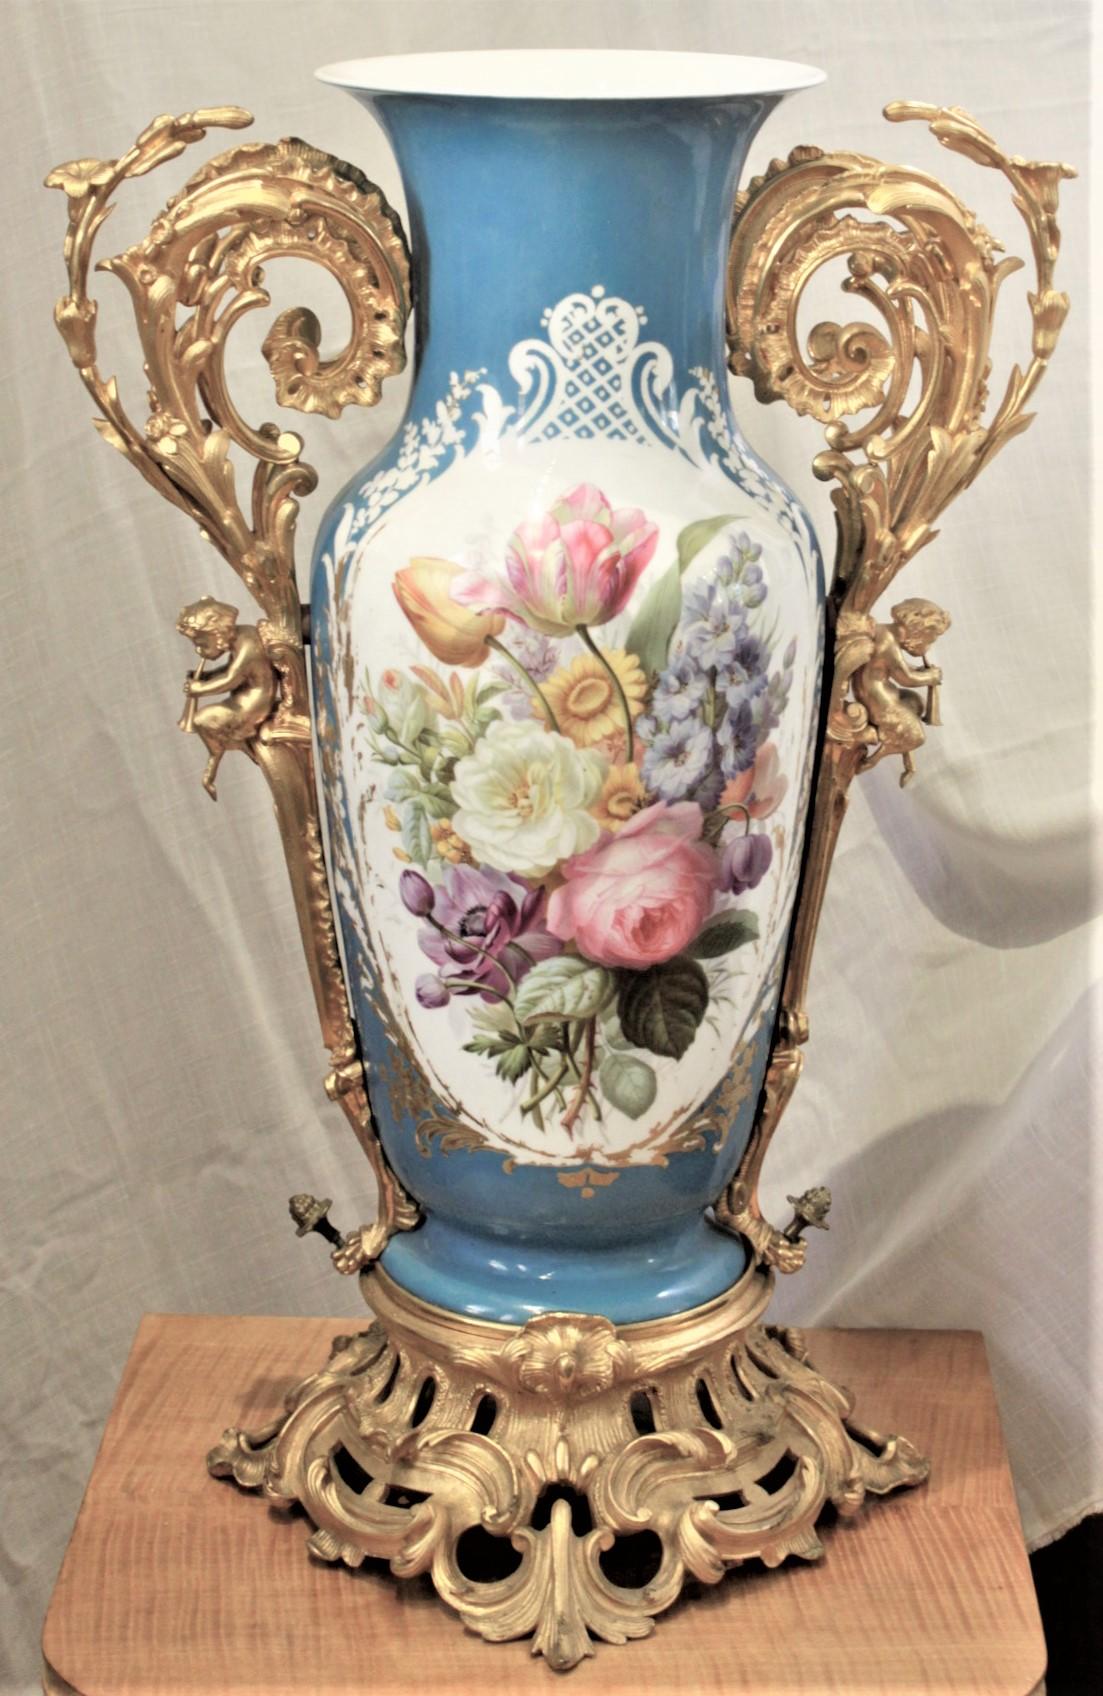 Louis XVI Large Antique Sevres Styled Hand-Painted Porcelain Vase with Gilt Bronze Mounts For Sale